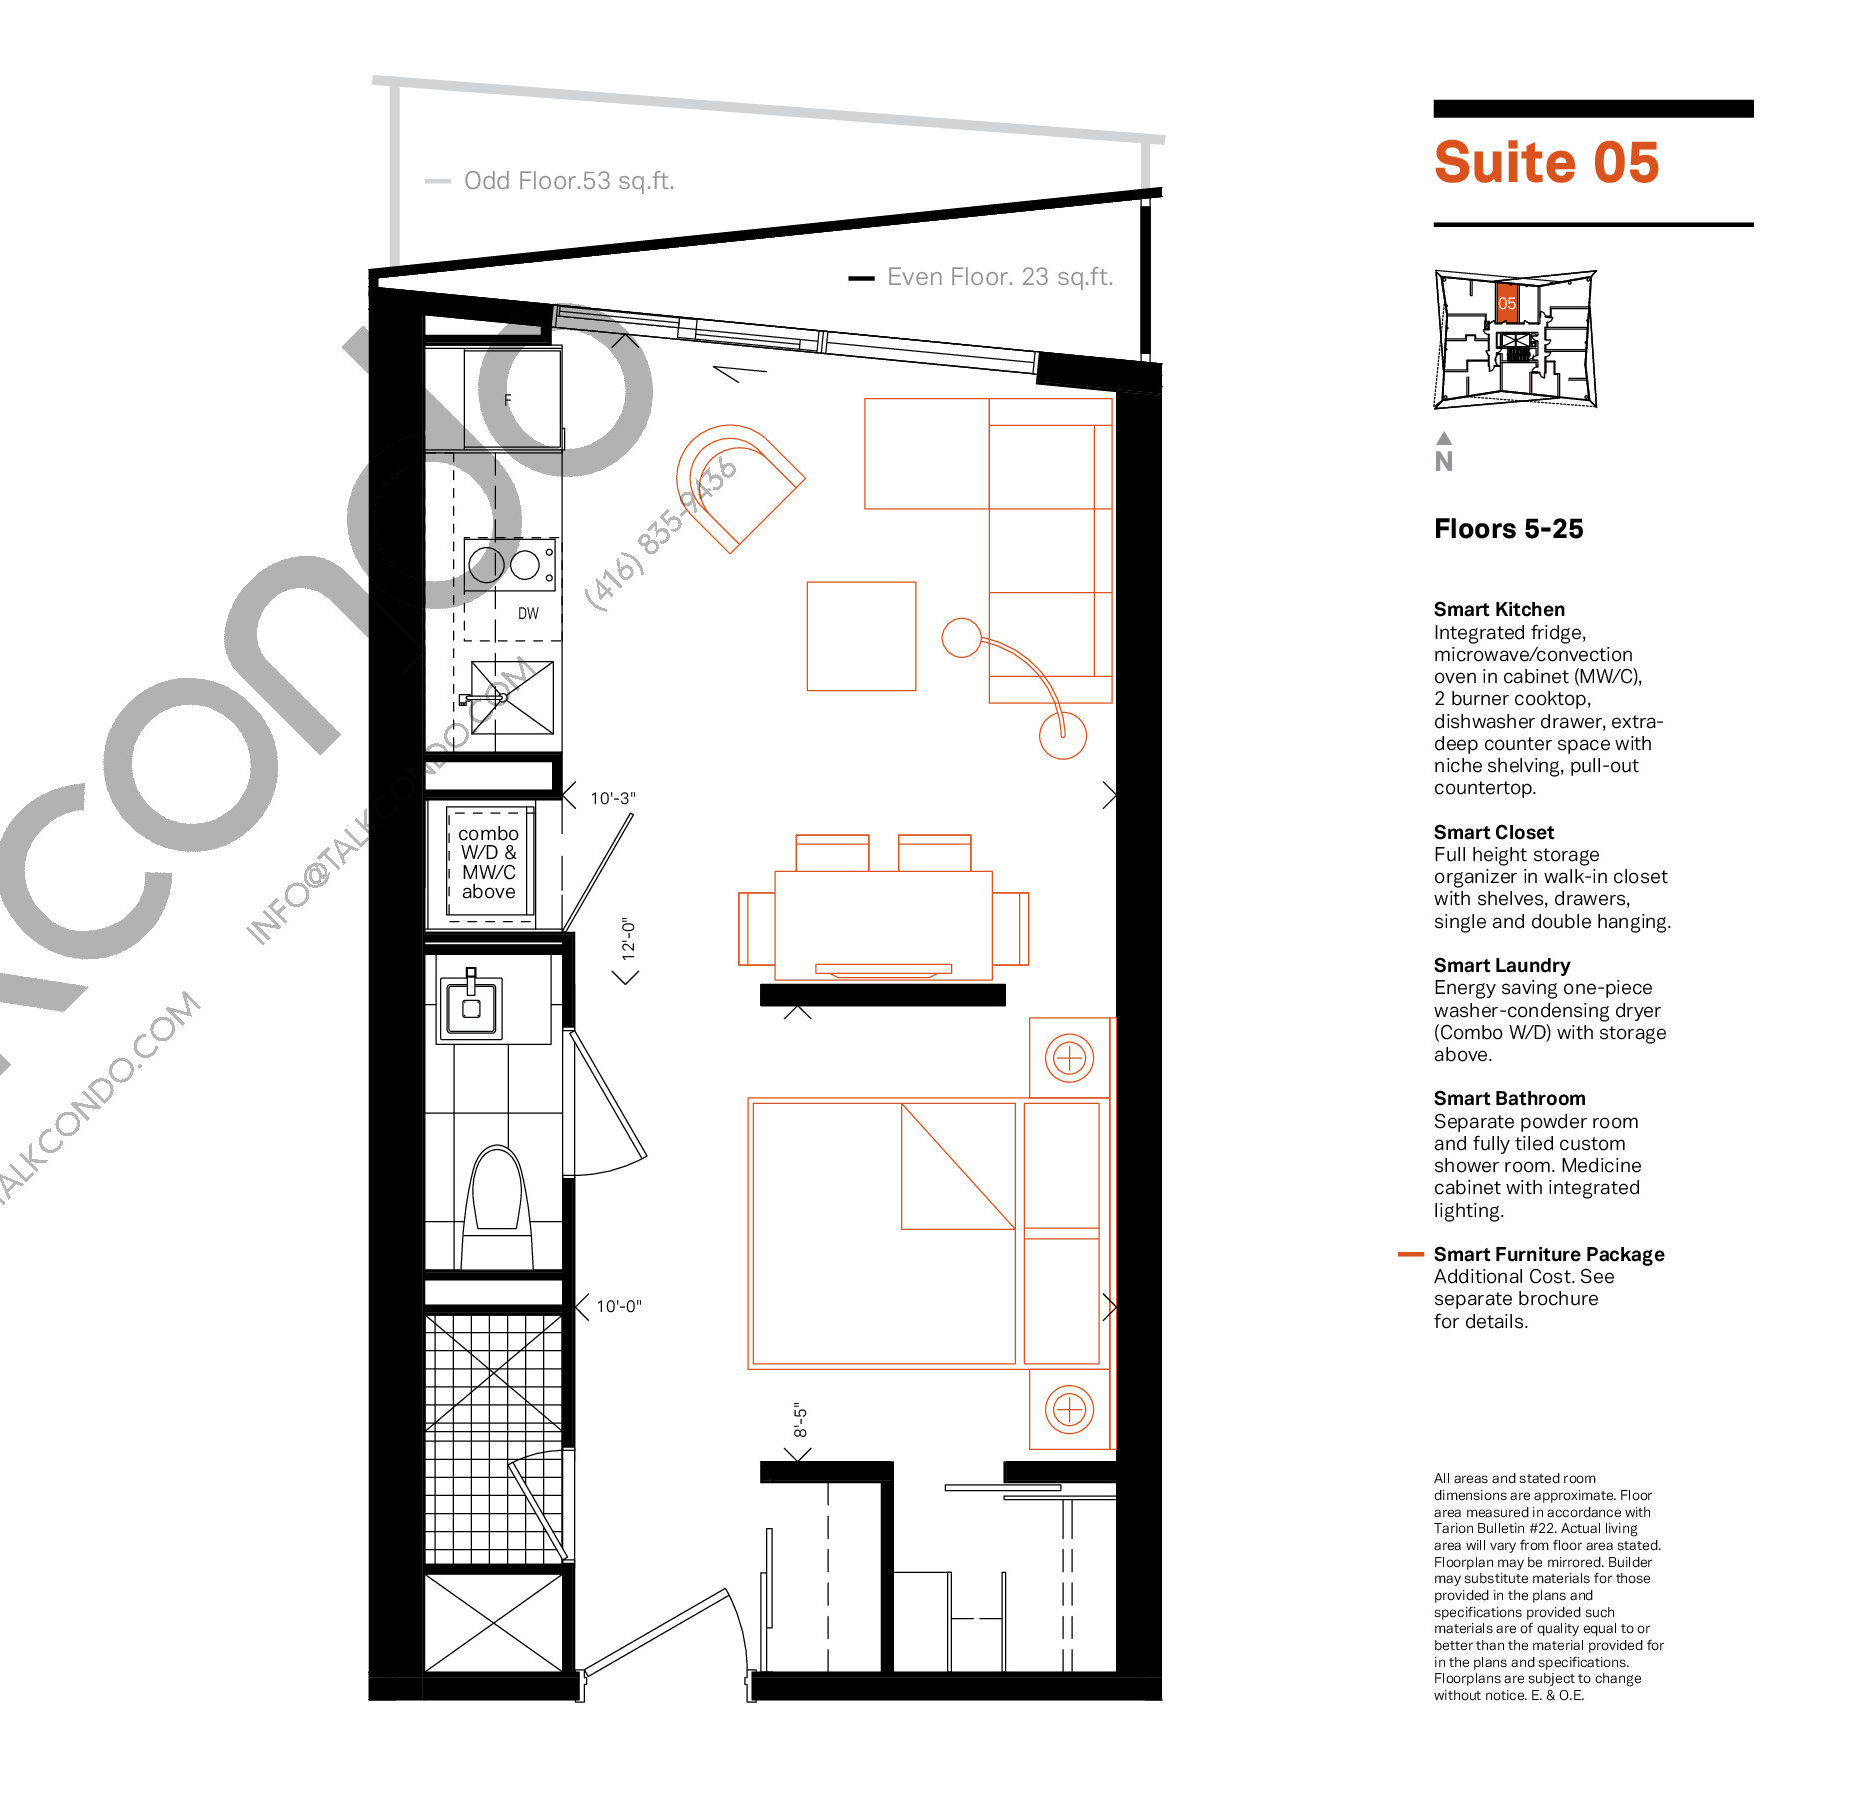 Smart House Condos Floor Plans, Prices, Availability